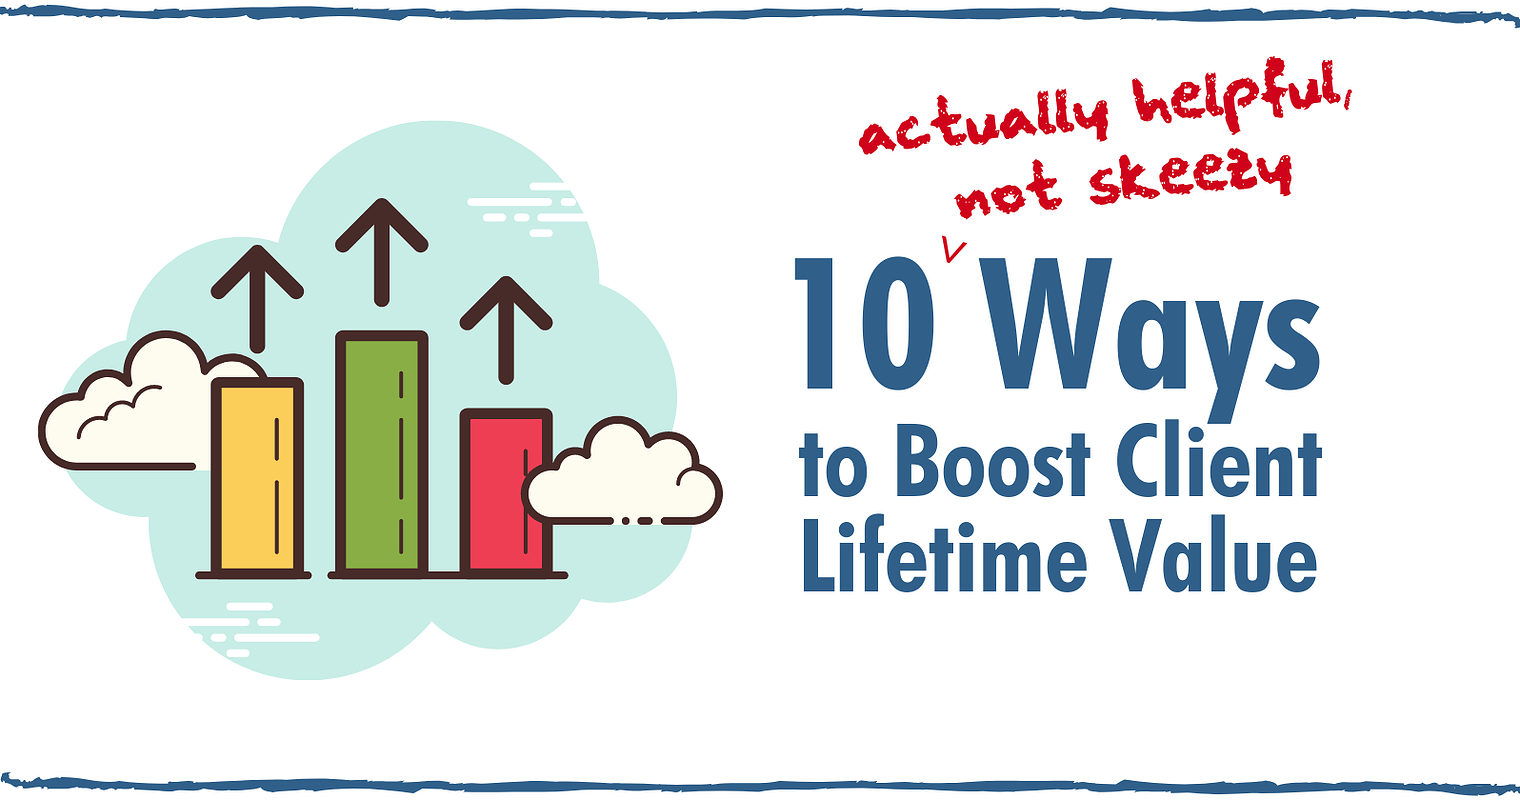 10 Ways Content Marketers & SEO Pros Can Boost Client Lifetime Value Right Now